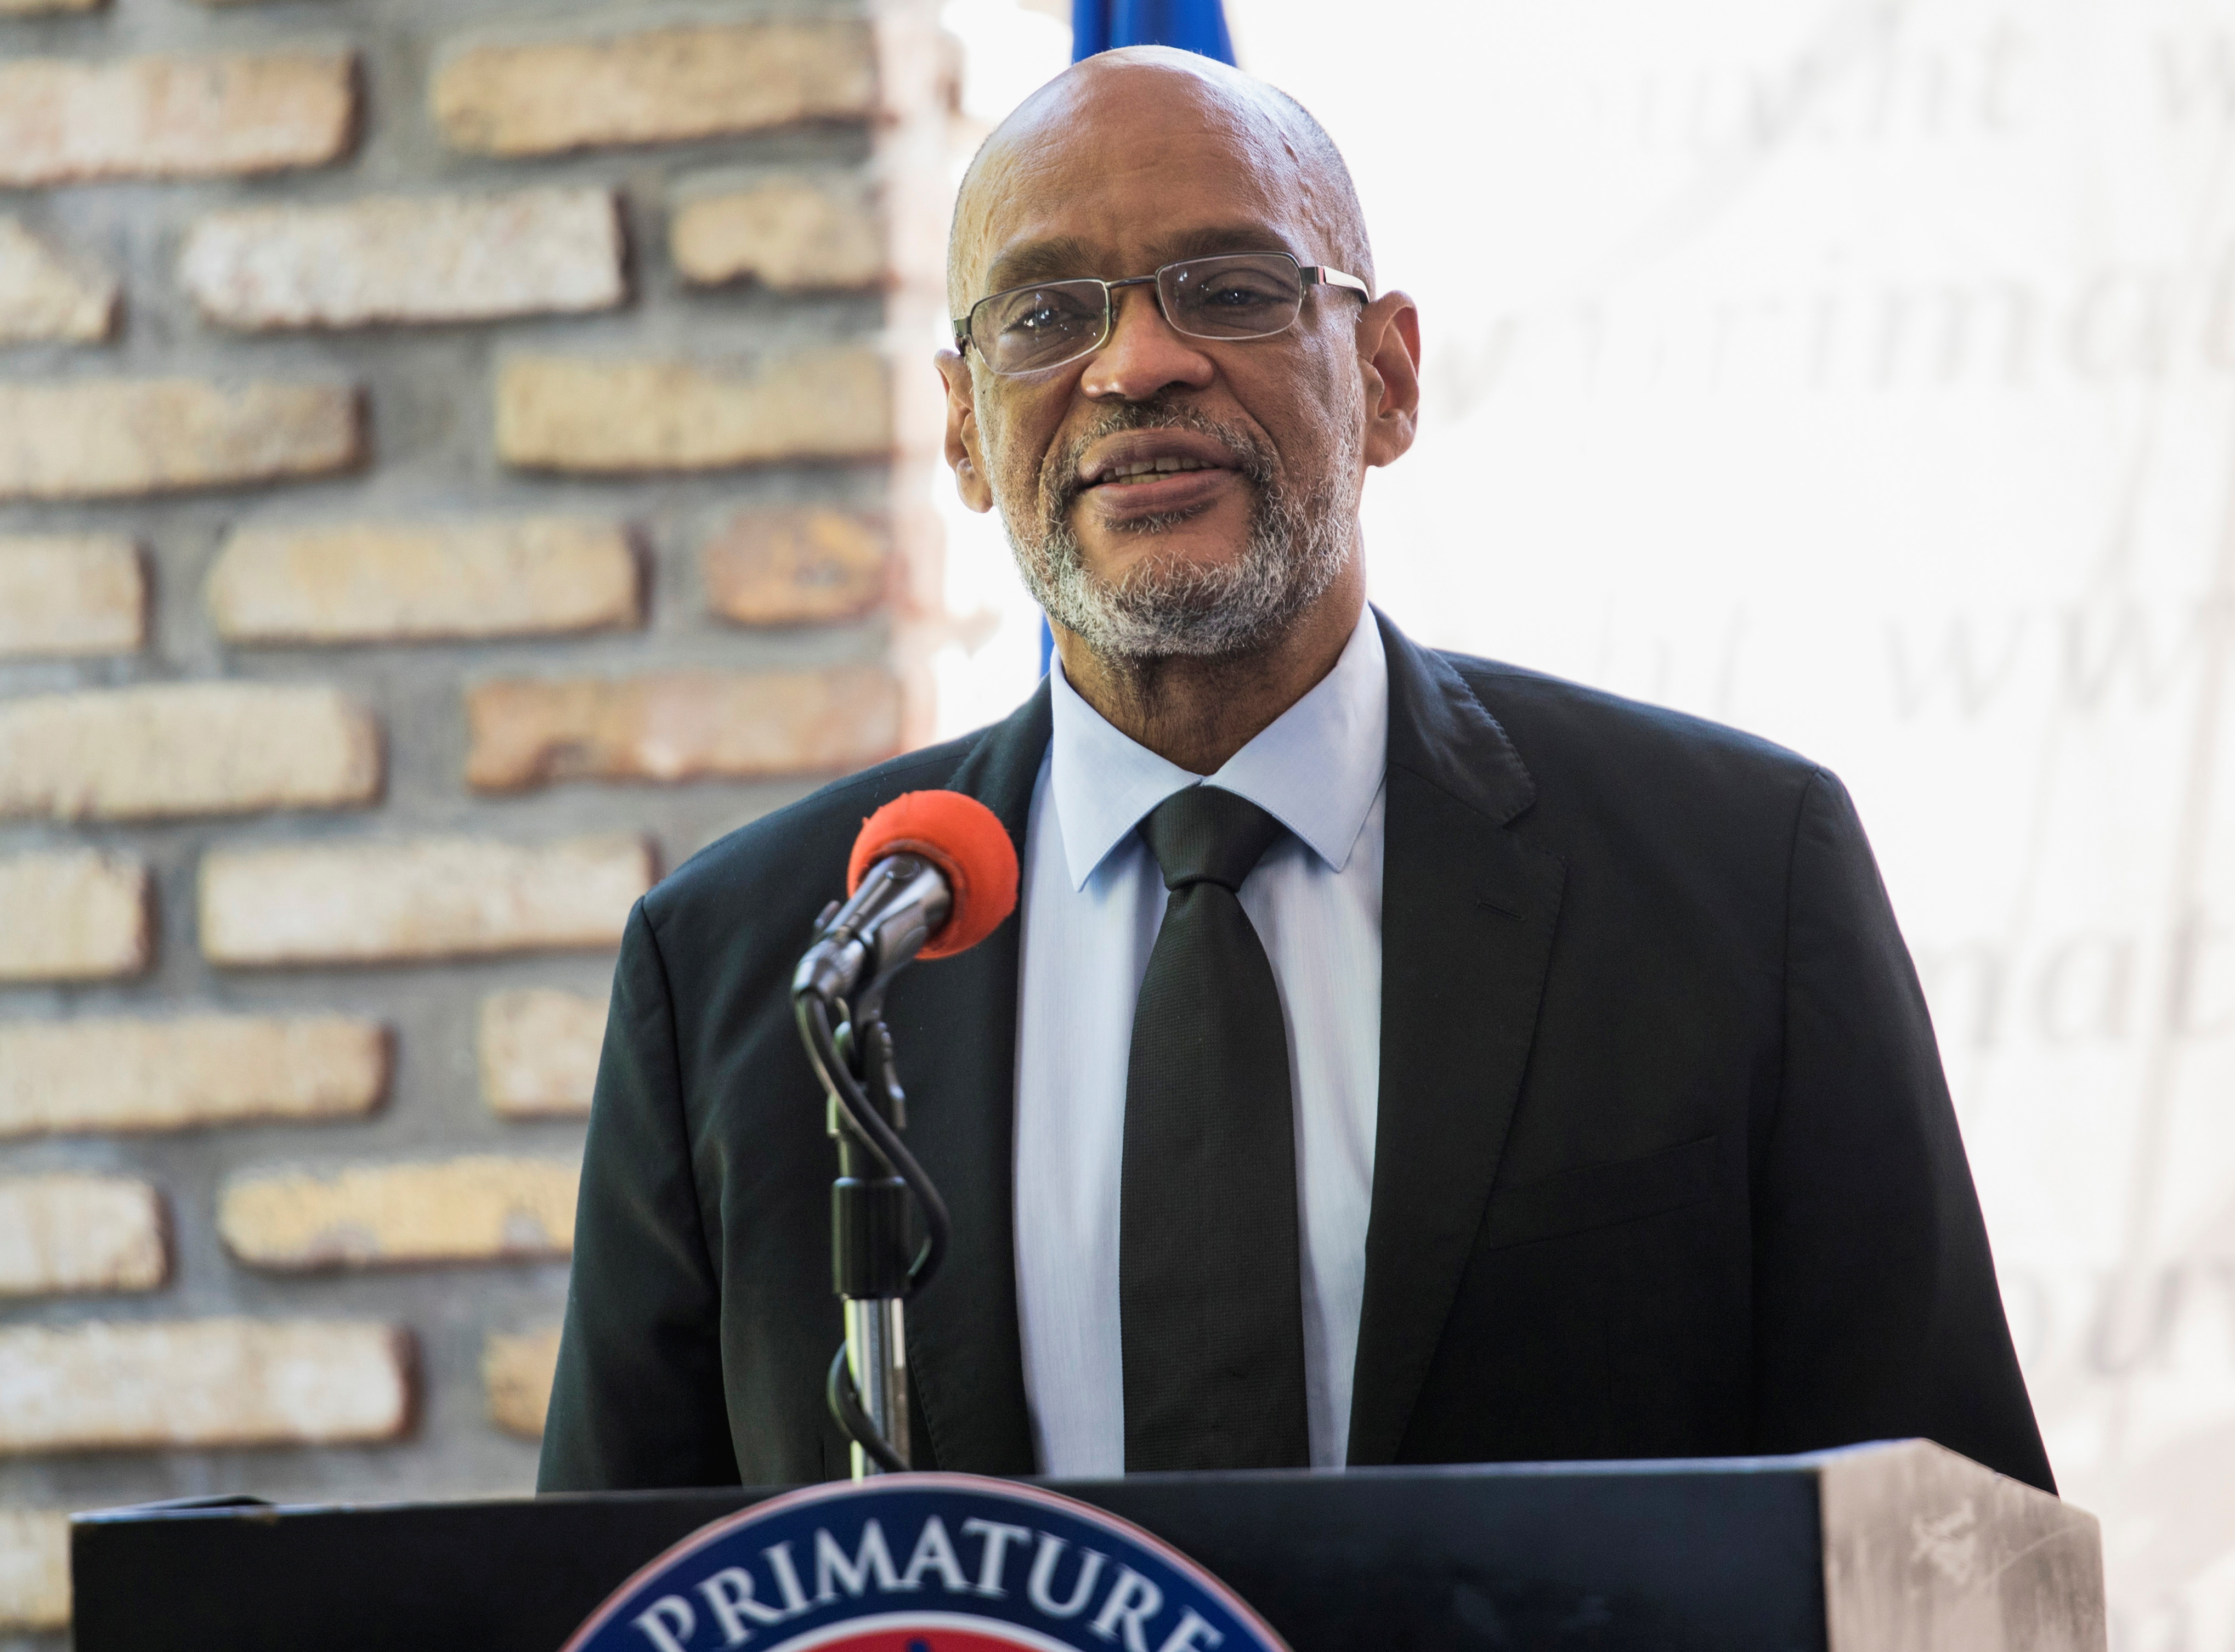 Haiti's Prime Minister Ariel Henry attends the signing ceremony of the 